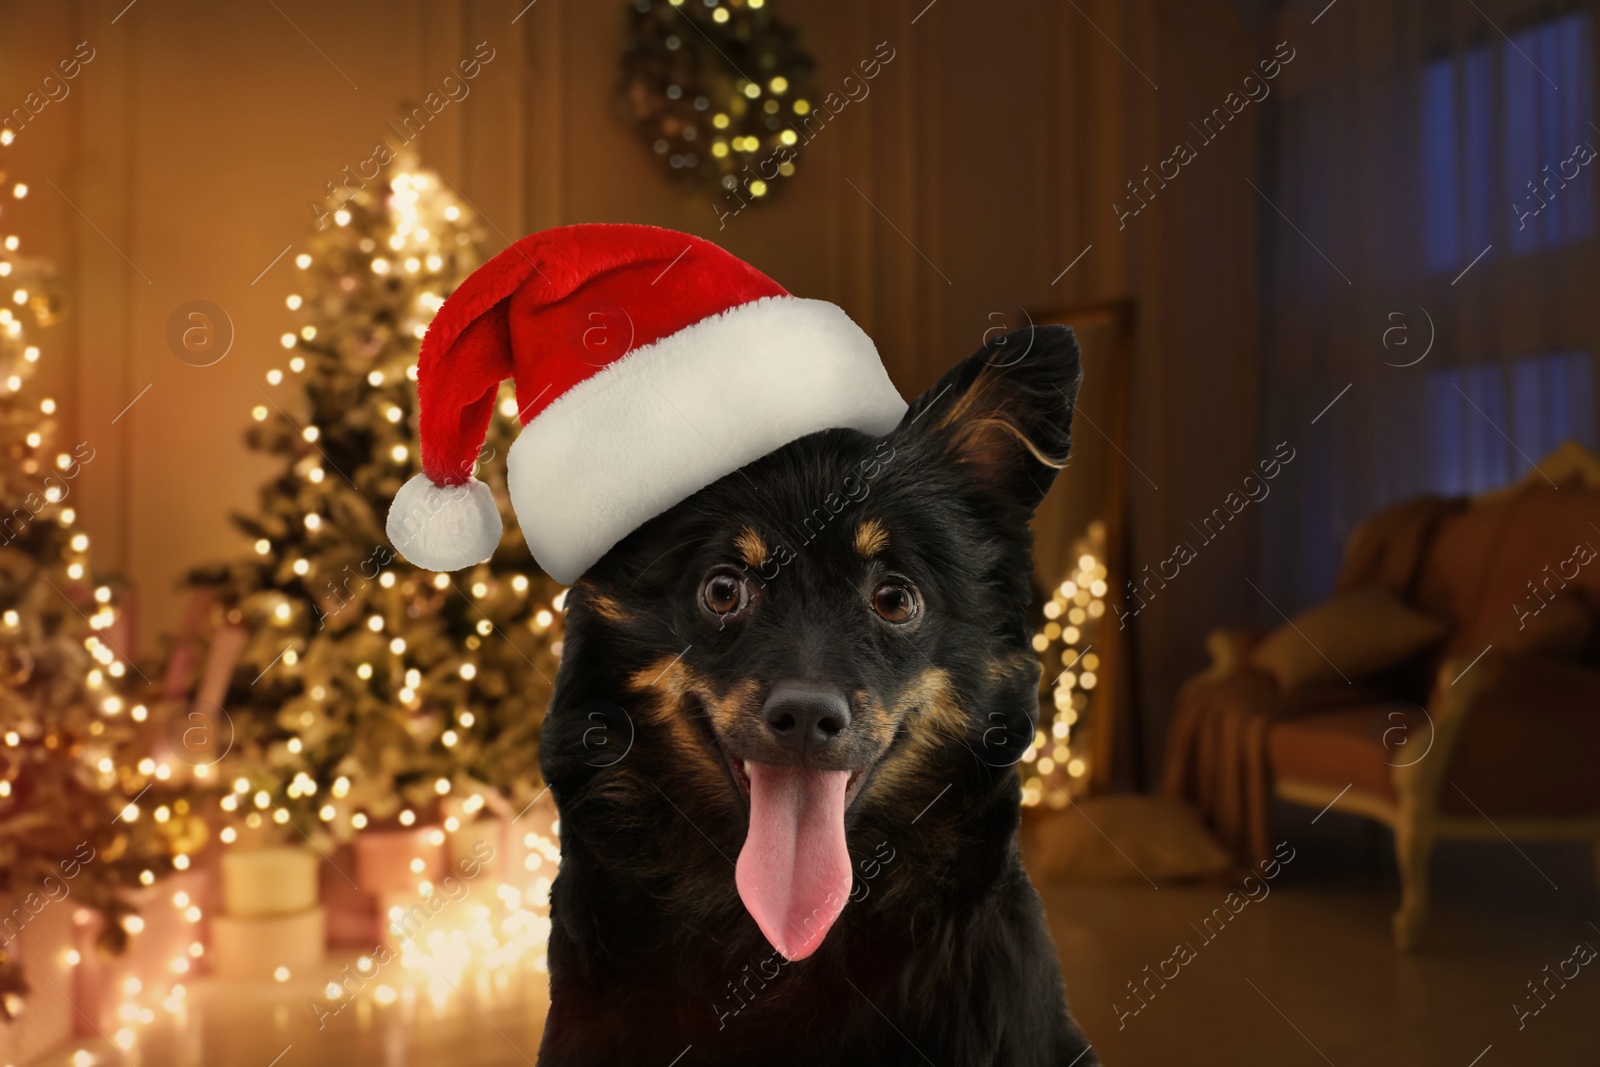 Image of Cute dog with Santa hat and room decorated for Christmas on background